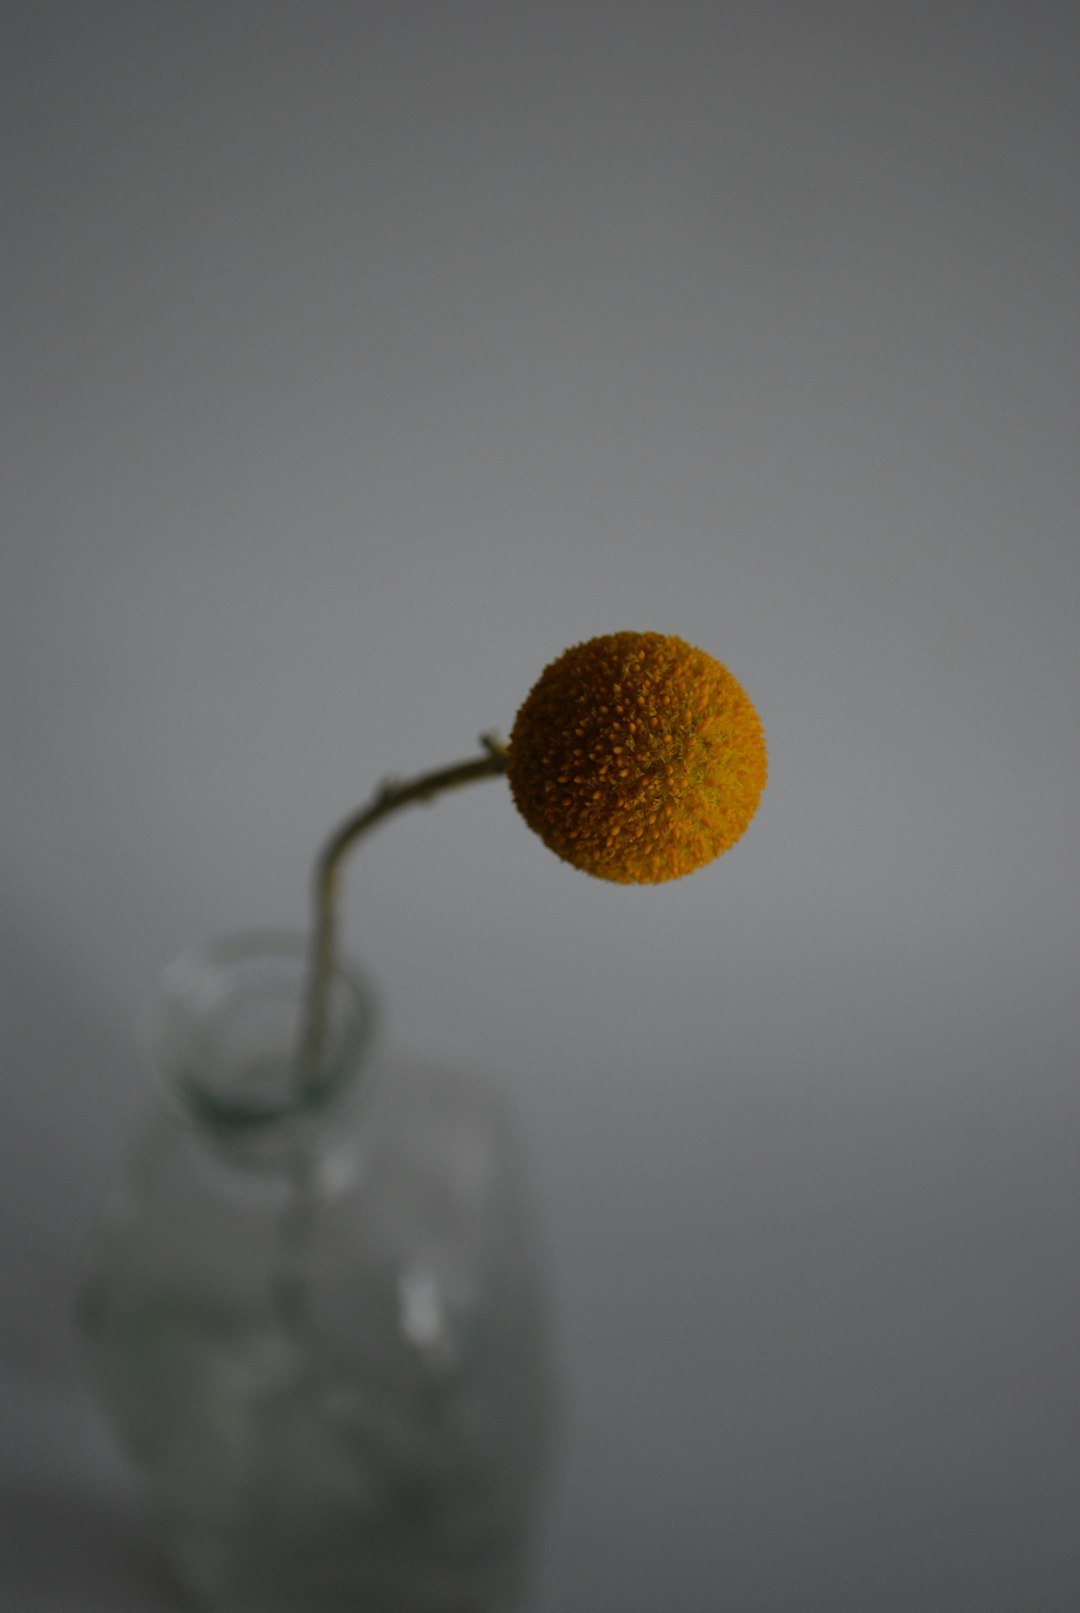 yellow round fruit on clear glass bottle